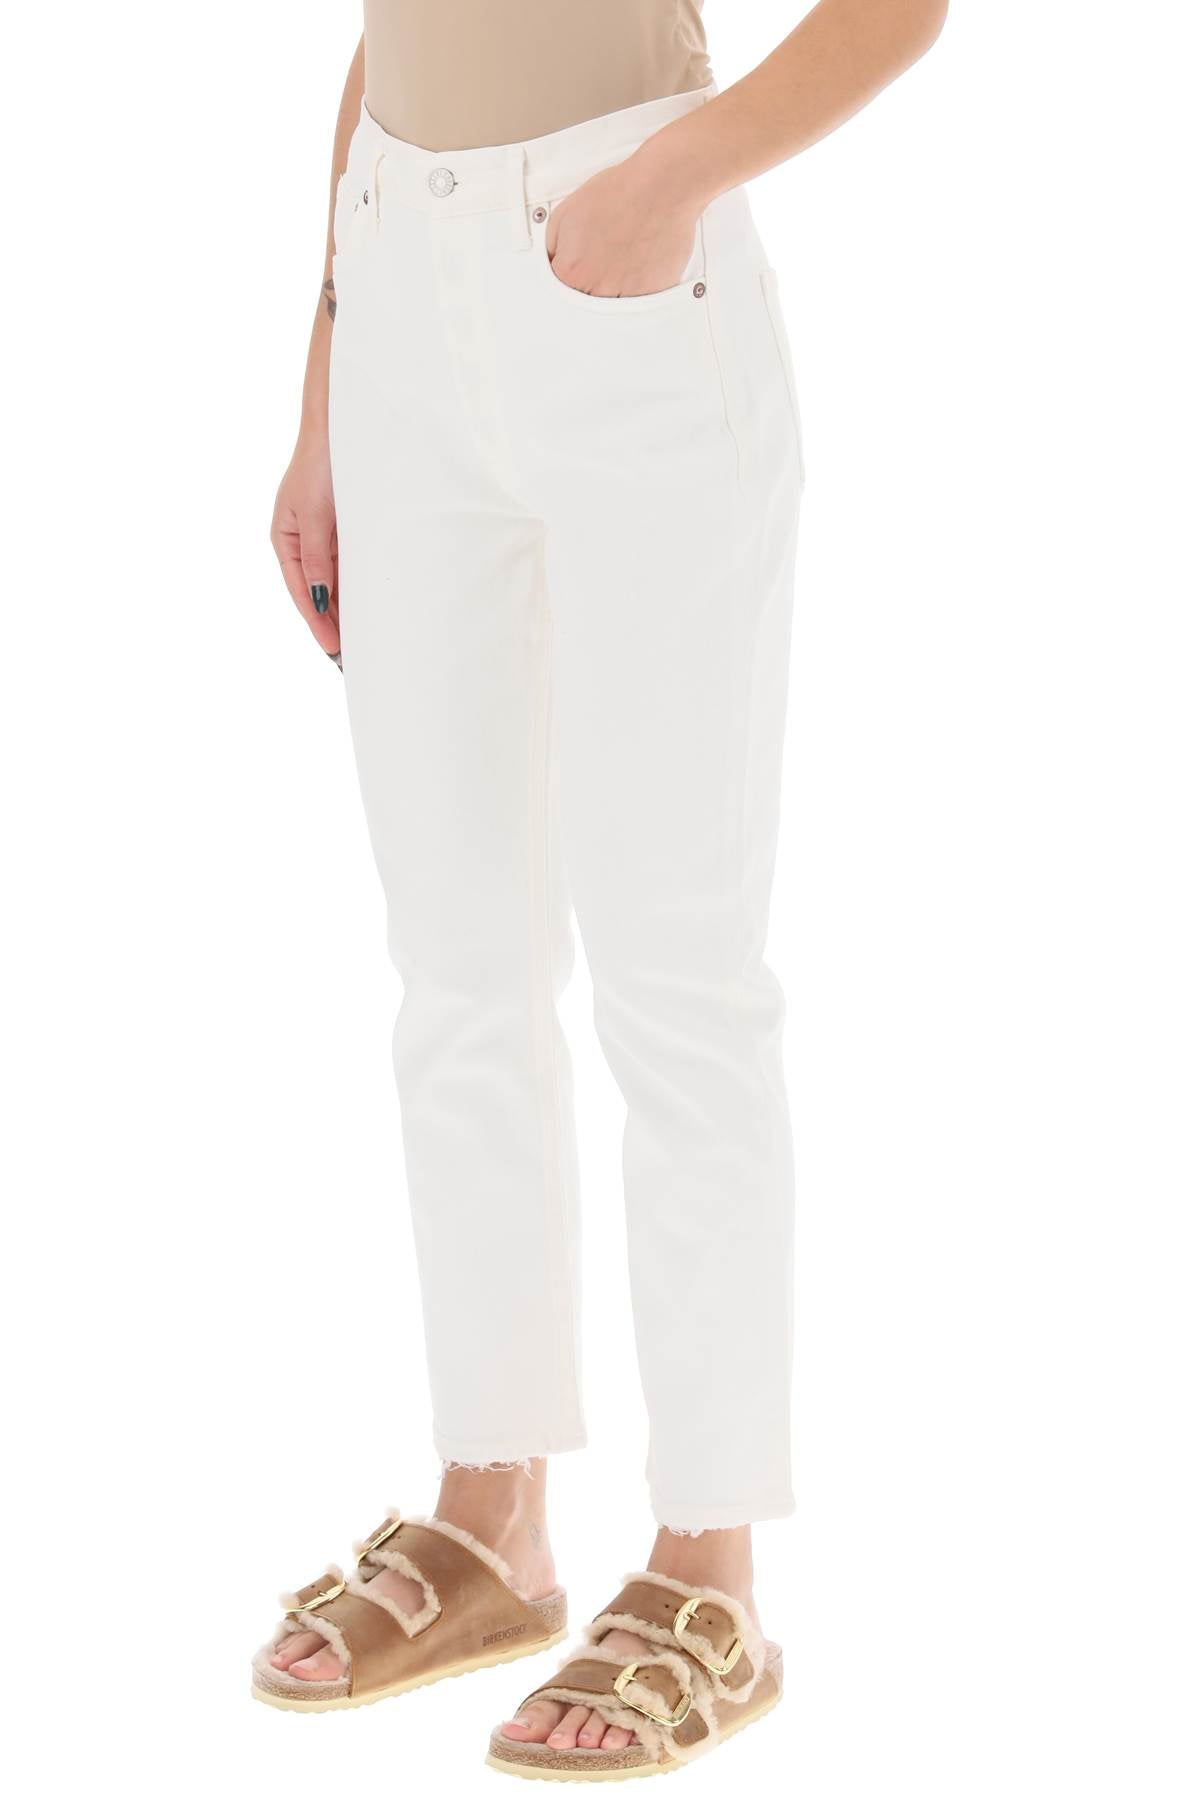 Agolde riley high-waisted cropped jeans-3